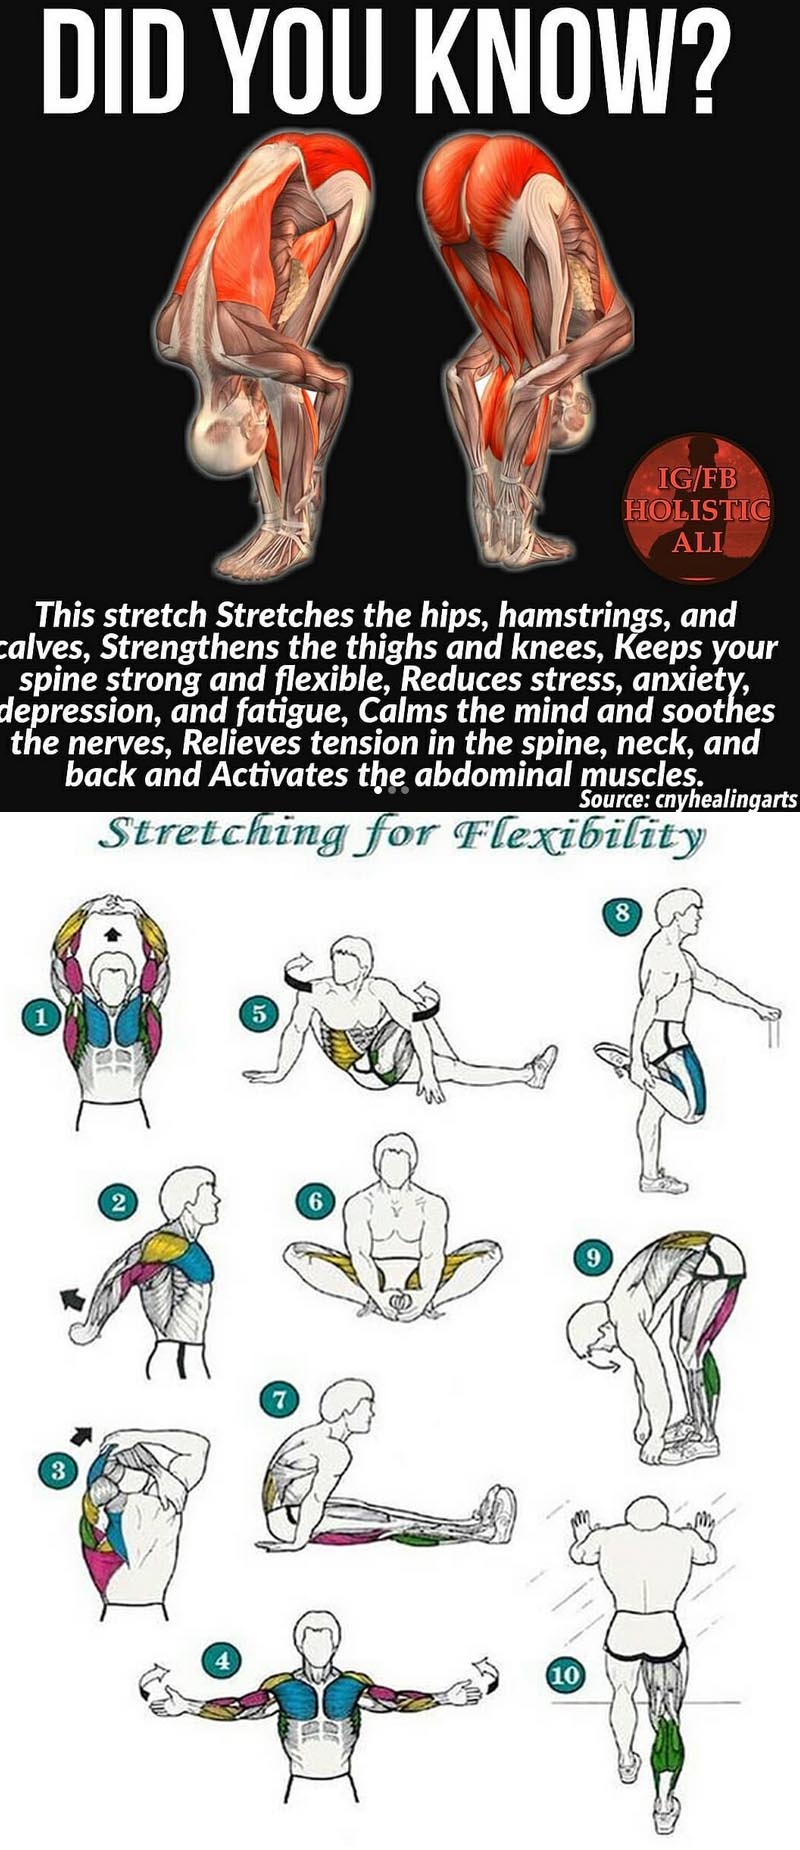 Stretching for Flexibility